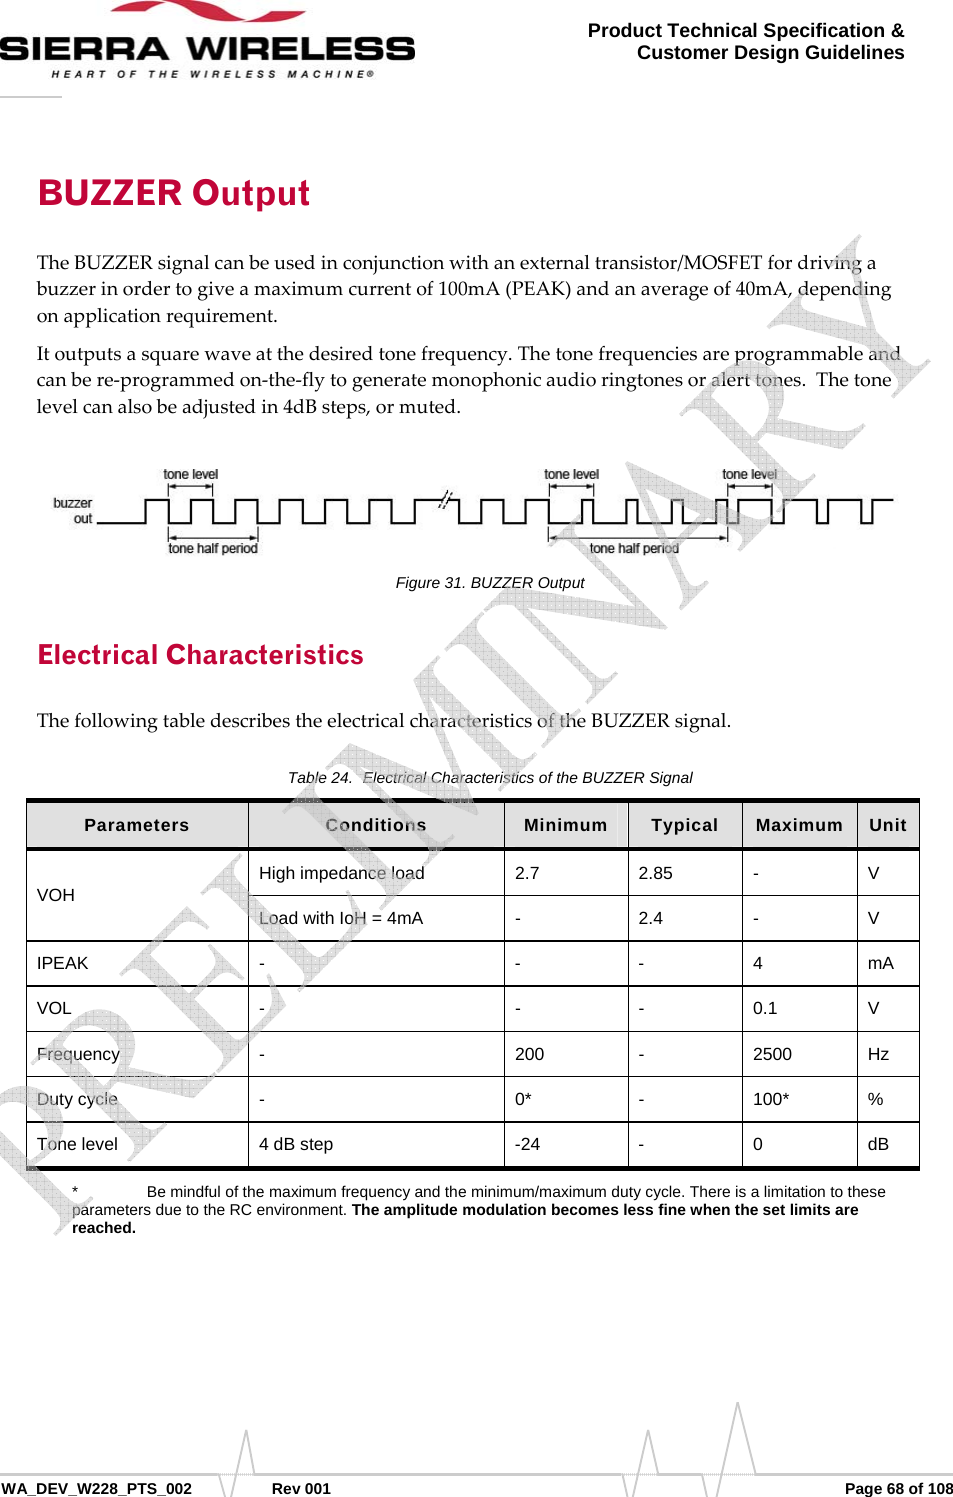      WA_DEV_W228_PTS_002 Rev 001  Page 68 of 108 Product Technical Specification &amp; Customer Design Guidelines BUZZER Output TheBUZZERsignalcanbeusedinconjunctionwithanexternaltransistor/MOSFETfordrivingabuzzerinordertogiveamaximumcurrentof100mA(PEAK)andanaverageof40mA,dependingonapplicationrequirement.Itoutputsasquarewaveatthedesiredtonefrequency.Thetonefrequenciesareprogrammableandcanbere‐programmedon‐the‐flytogeneratemonophonicaudioringtonesoralerttones.Thetonelevelcanalsobeadjustedin4dBsteps,ormuted.Figure 31. BUZZER Output Electrical Characteristics ThefollowingtabledescribestheelectricalcharacteristicsoftheBUZZERsignal.Table 24.  Electrical Characteristics of the BUZZER Signal Parameters  Conditions  Minimum  Typical  Maximum  Unit VOH High impedance load  2.7  2.85  -  V Load with IoH = 4mA  -  2.4  -  V IPEAK -  - - 4 mA VOL -  - - 0.1 V Frequency -  200 - 2500 Hz Duty cycle  -  0*  -  100*  % Tone level  4 dB step  -24  -  0  dB *    Be mindful of the maximum frequency and the minimum/maximum duty cycle. There is a limitation to these parameters due to the RC environment. The amplitude modulation becomes less fine when the set limits are reached.     